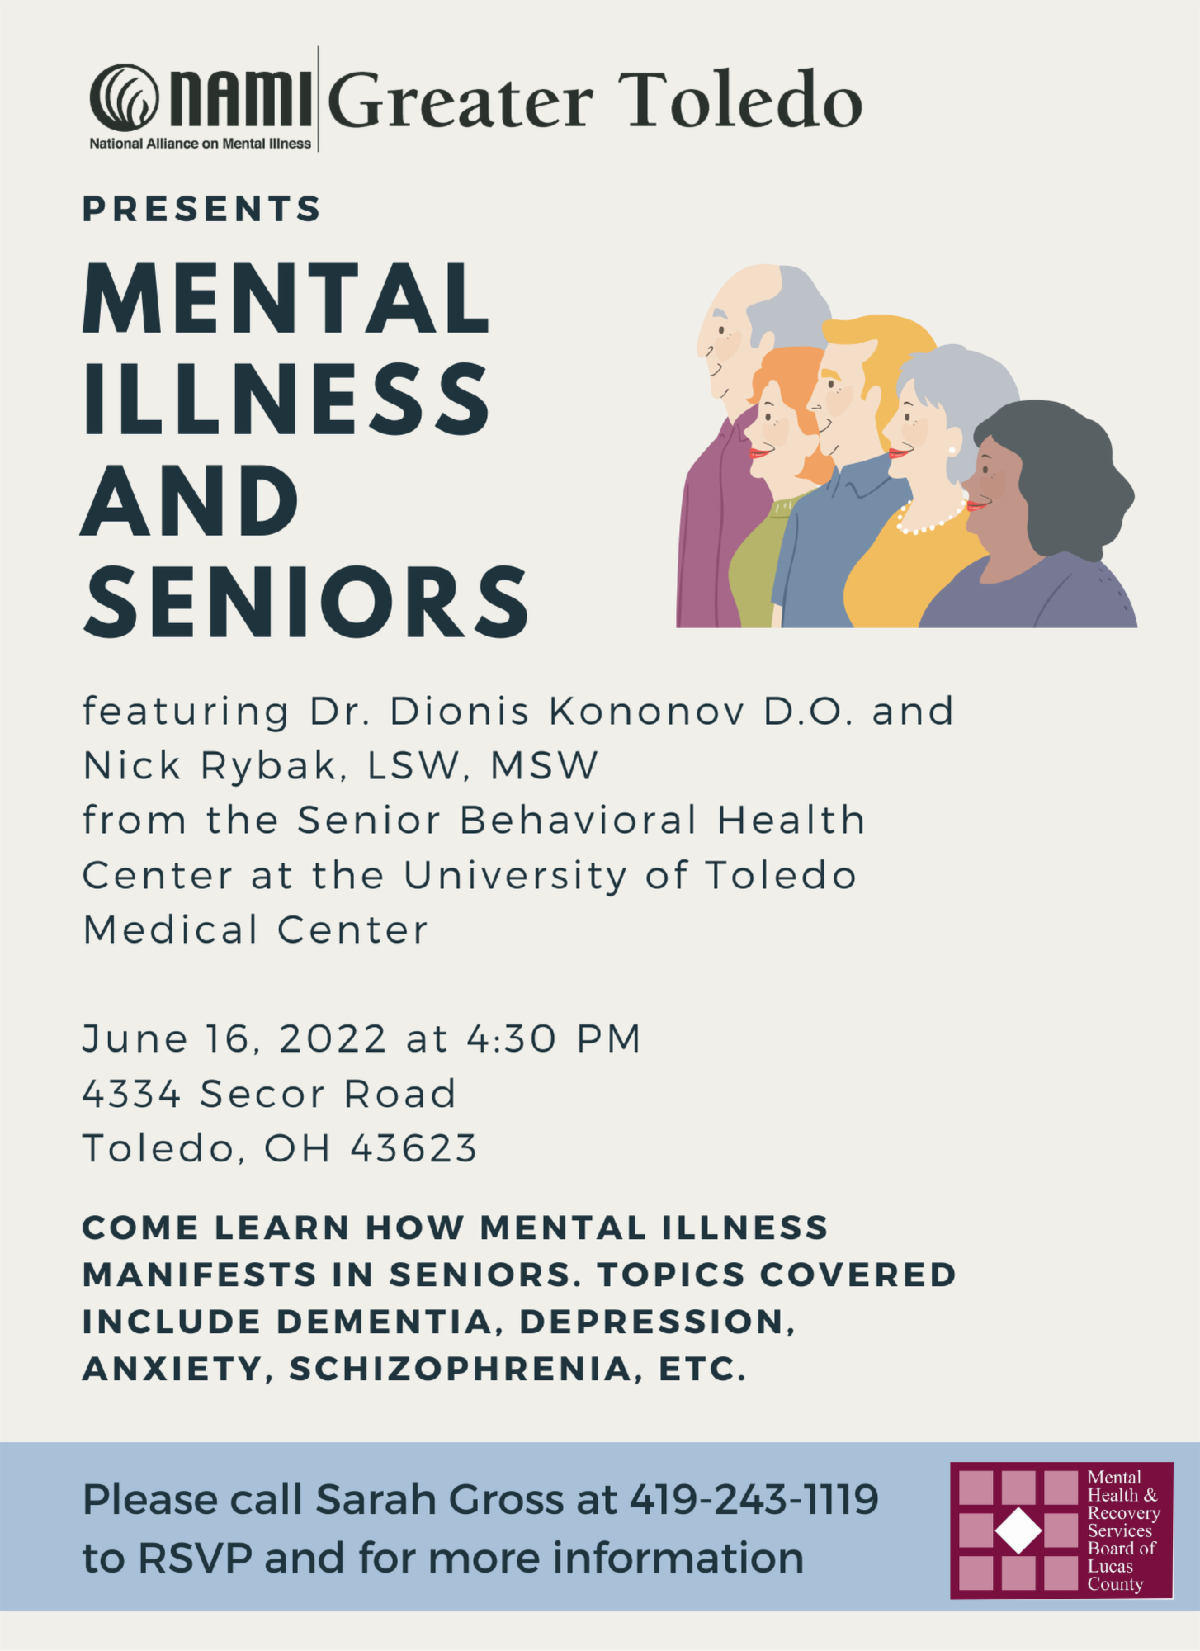 Flyer for NAMI Mental Illness and Seniors Event